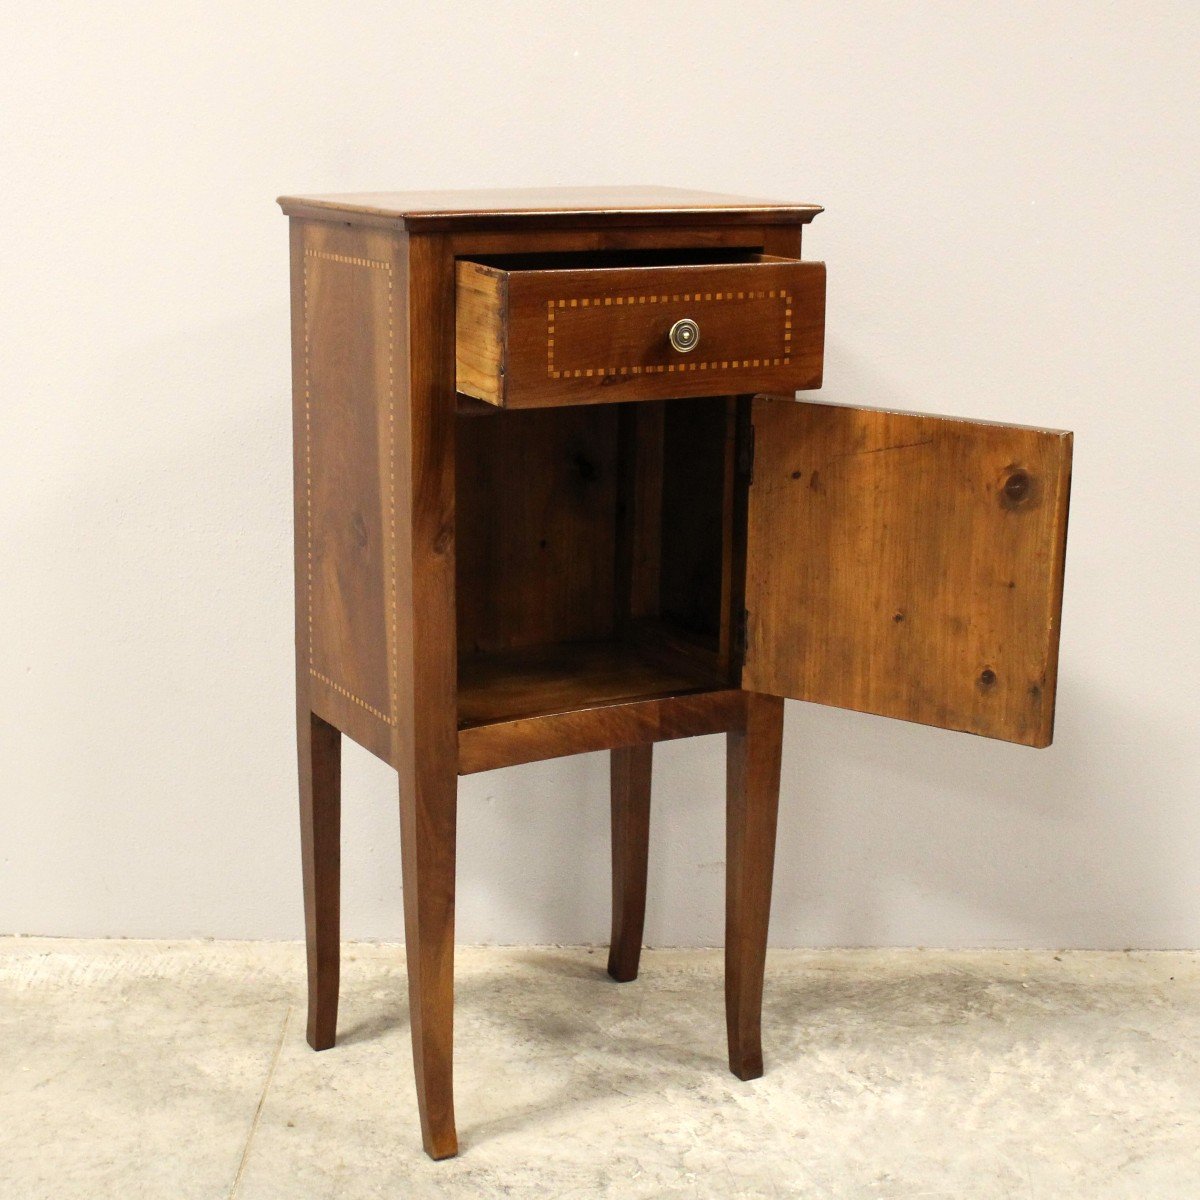 Antique Directoire Bedside Nightstand Table In Walnut And Marquetry - Italy 19th-photo-1